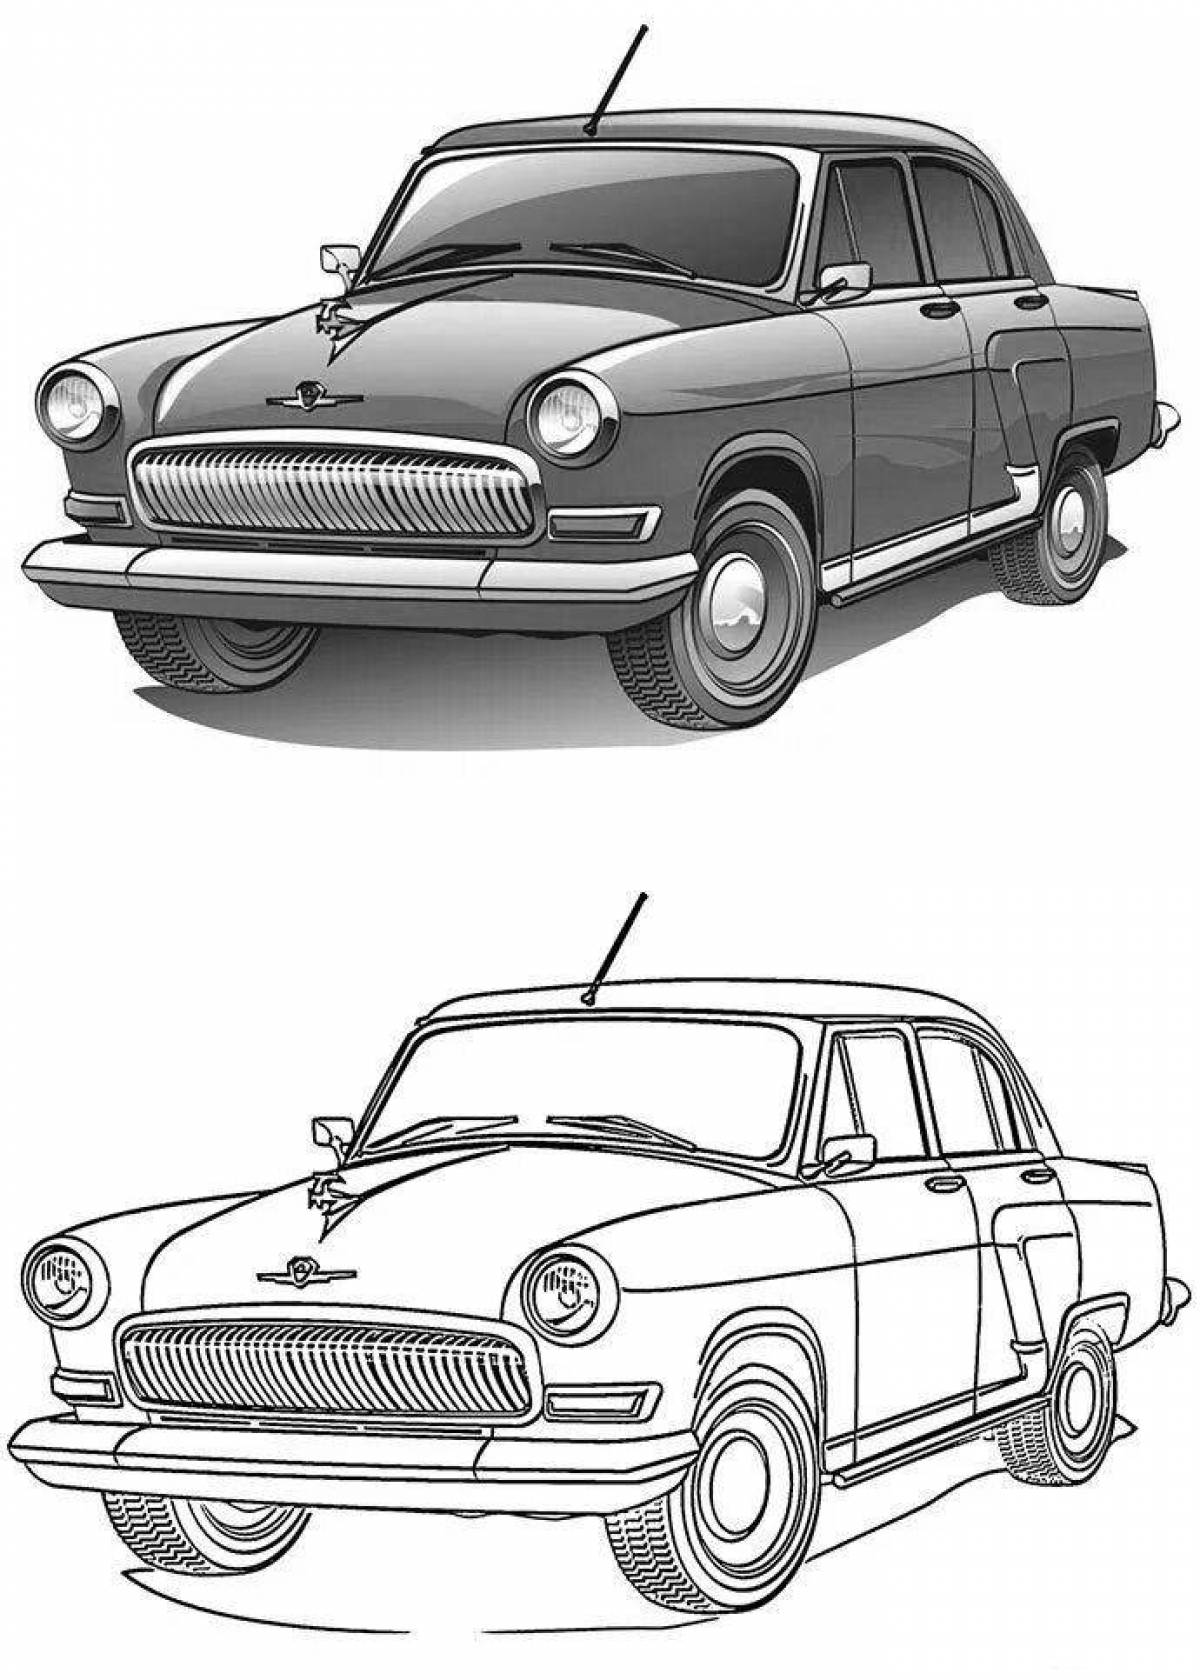 Coloring page magnificent soviet cars